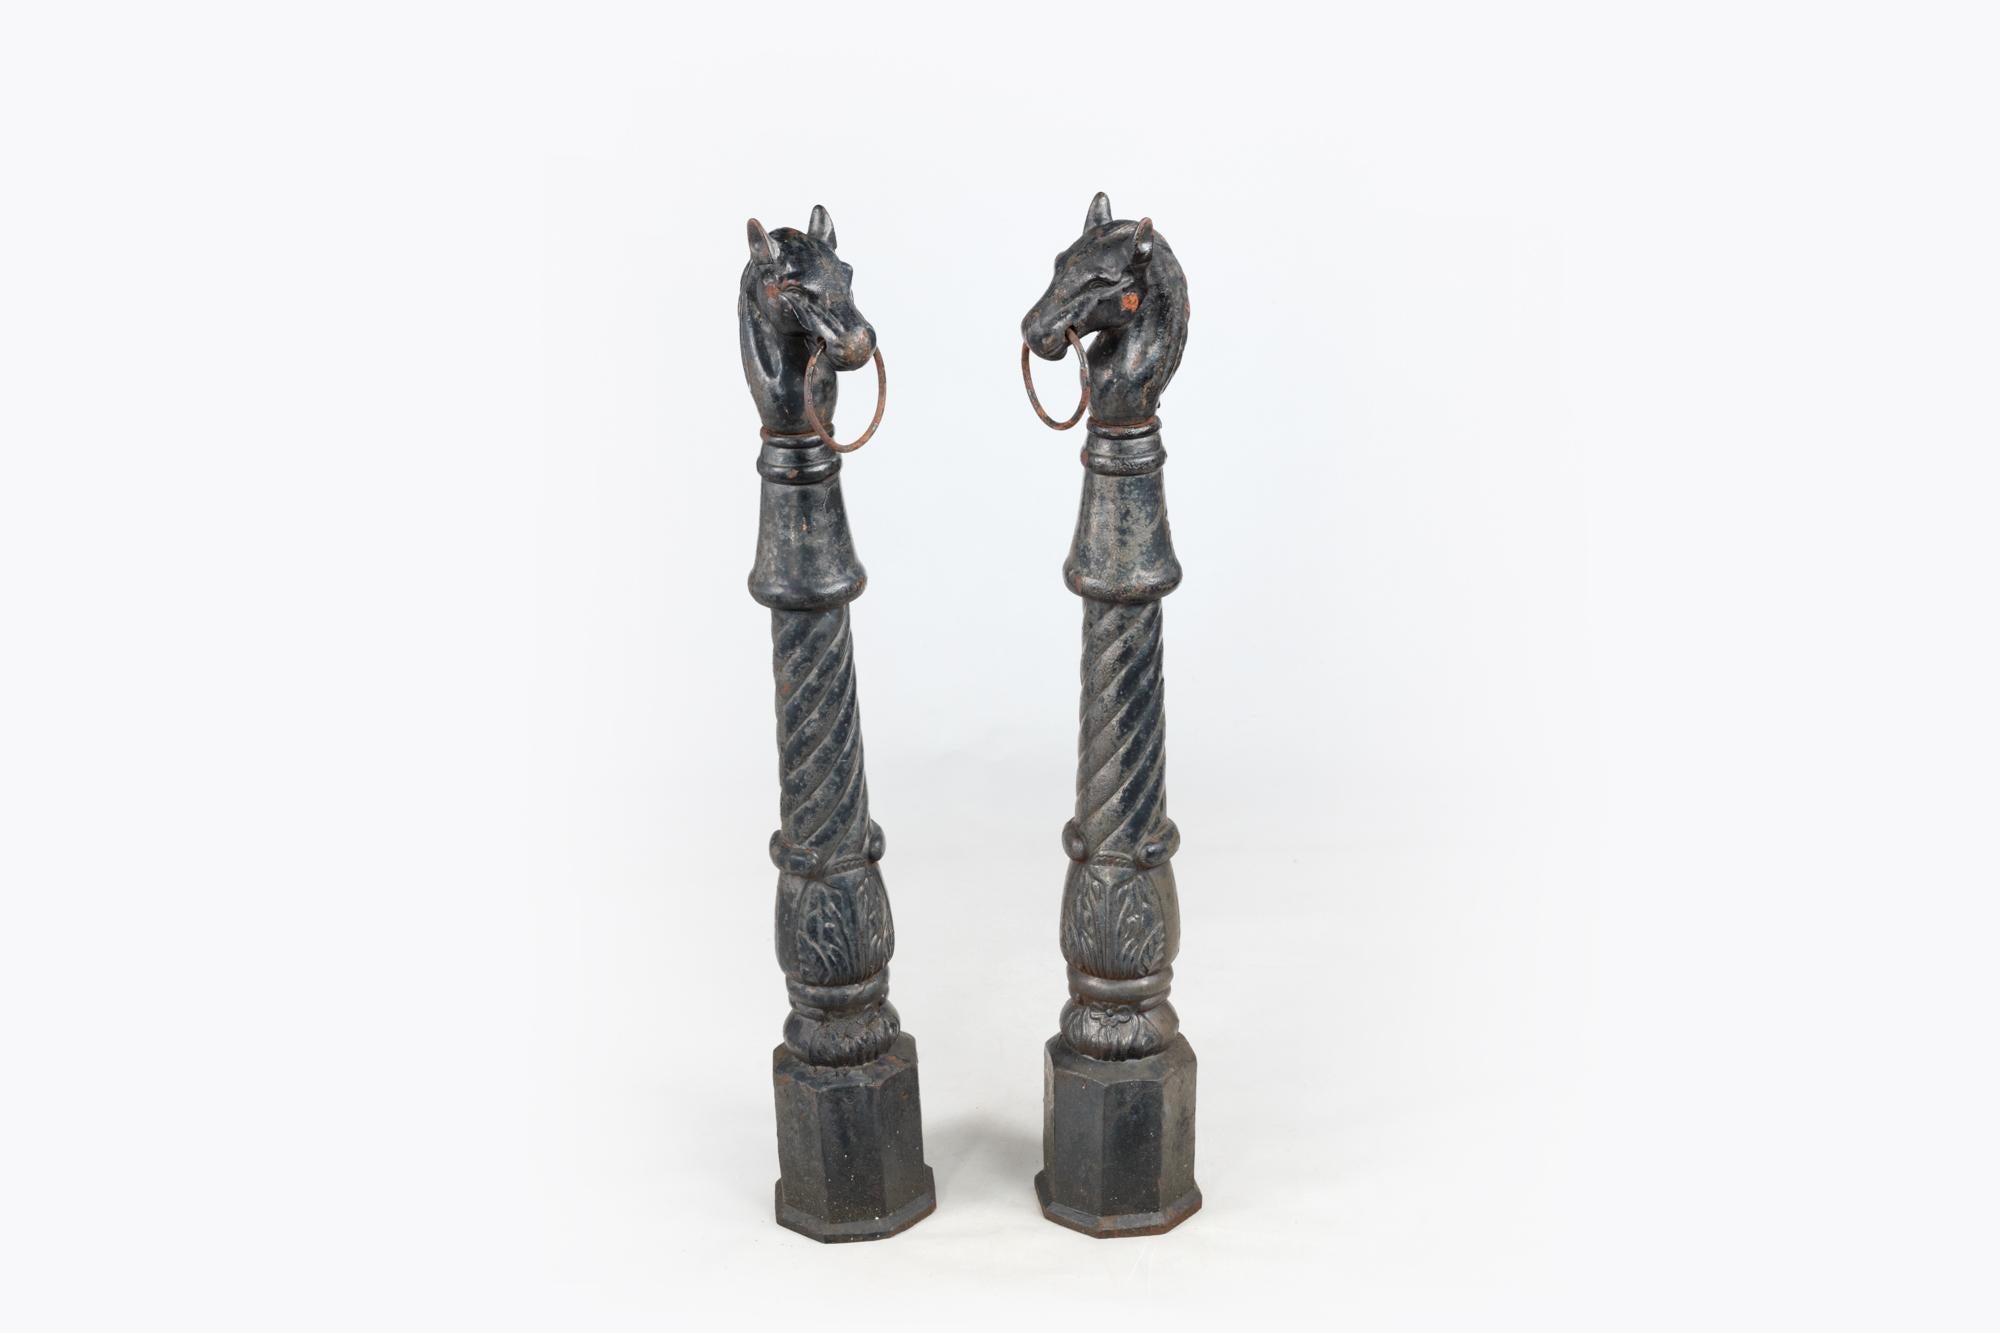 Pair of heavy 19th Century hitching posts with distinctive horse heads and movable horse bits on garlanded pillars atop moulded octagonal plinth bases. The black painted cast iron has an aged patina and the elegant form of both posts have superb